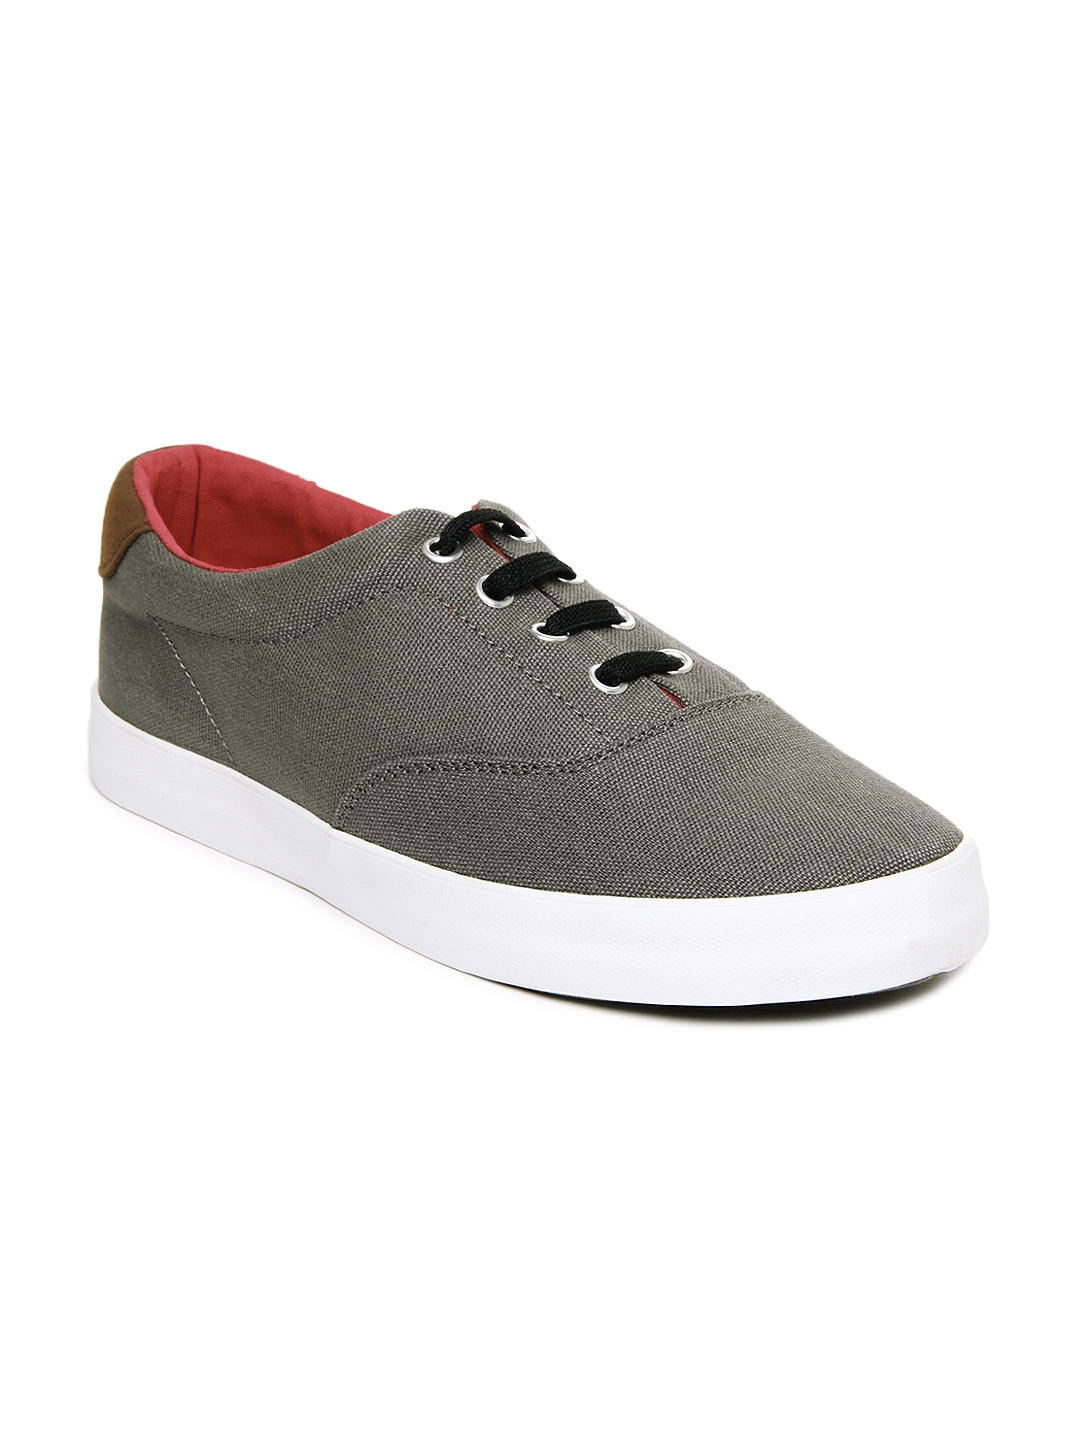 Buy Roadster Men Grey Casual Shoes - Casual Shoes for Men 388609 | Myntra